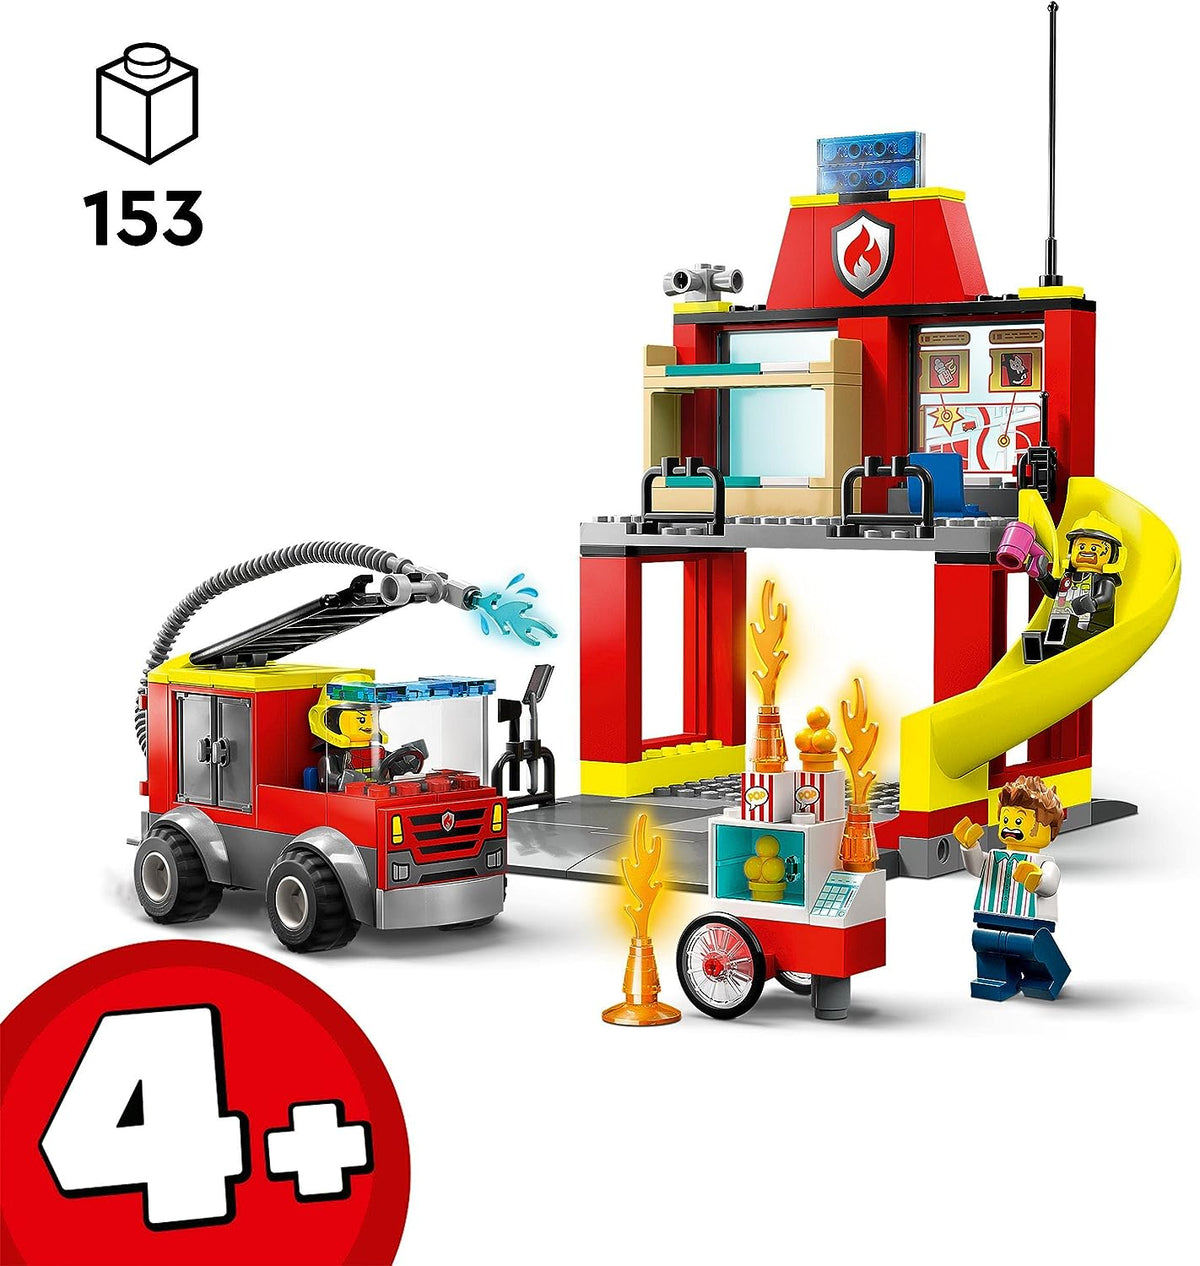 LEGO City Fire Station and Fire Engine